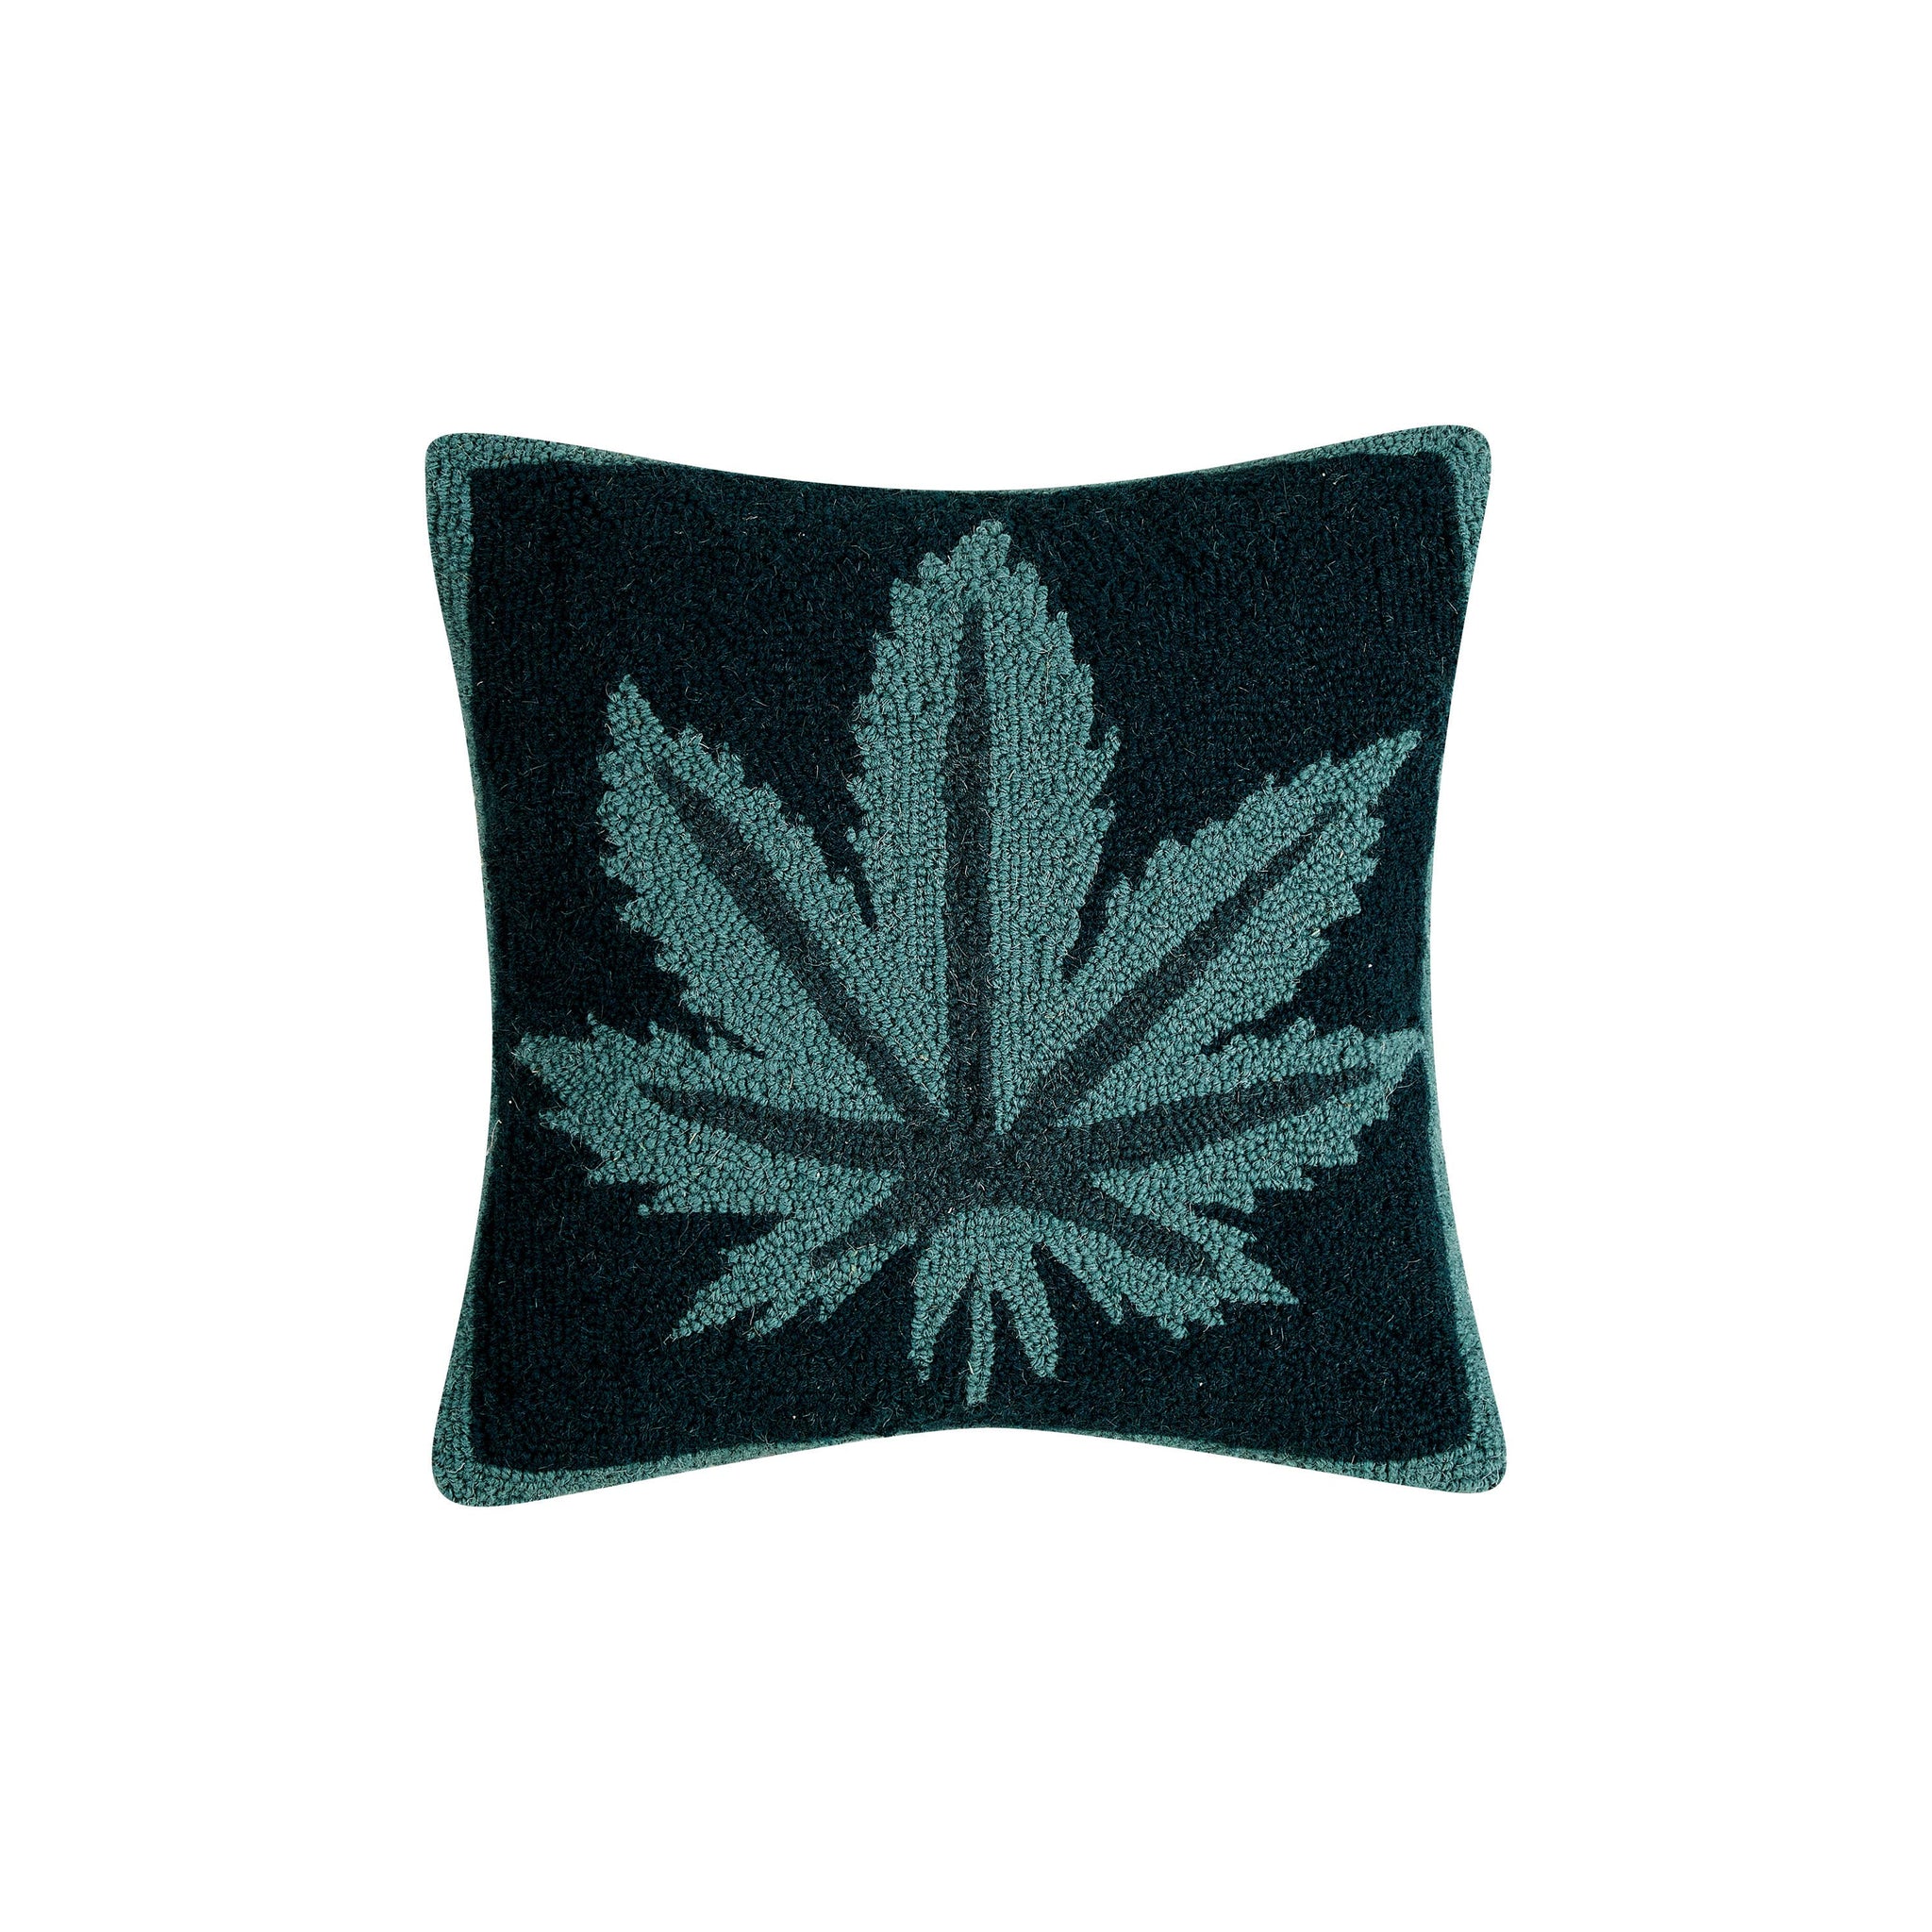 Mary Jane Hook Pillow in Teal